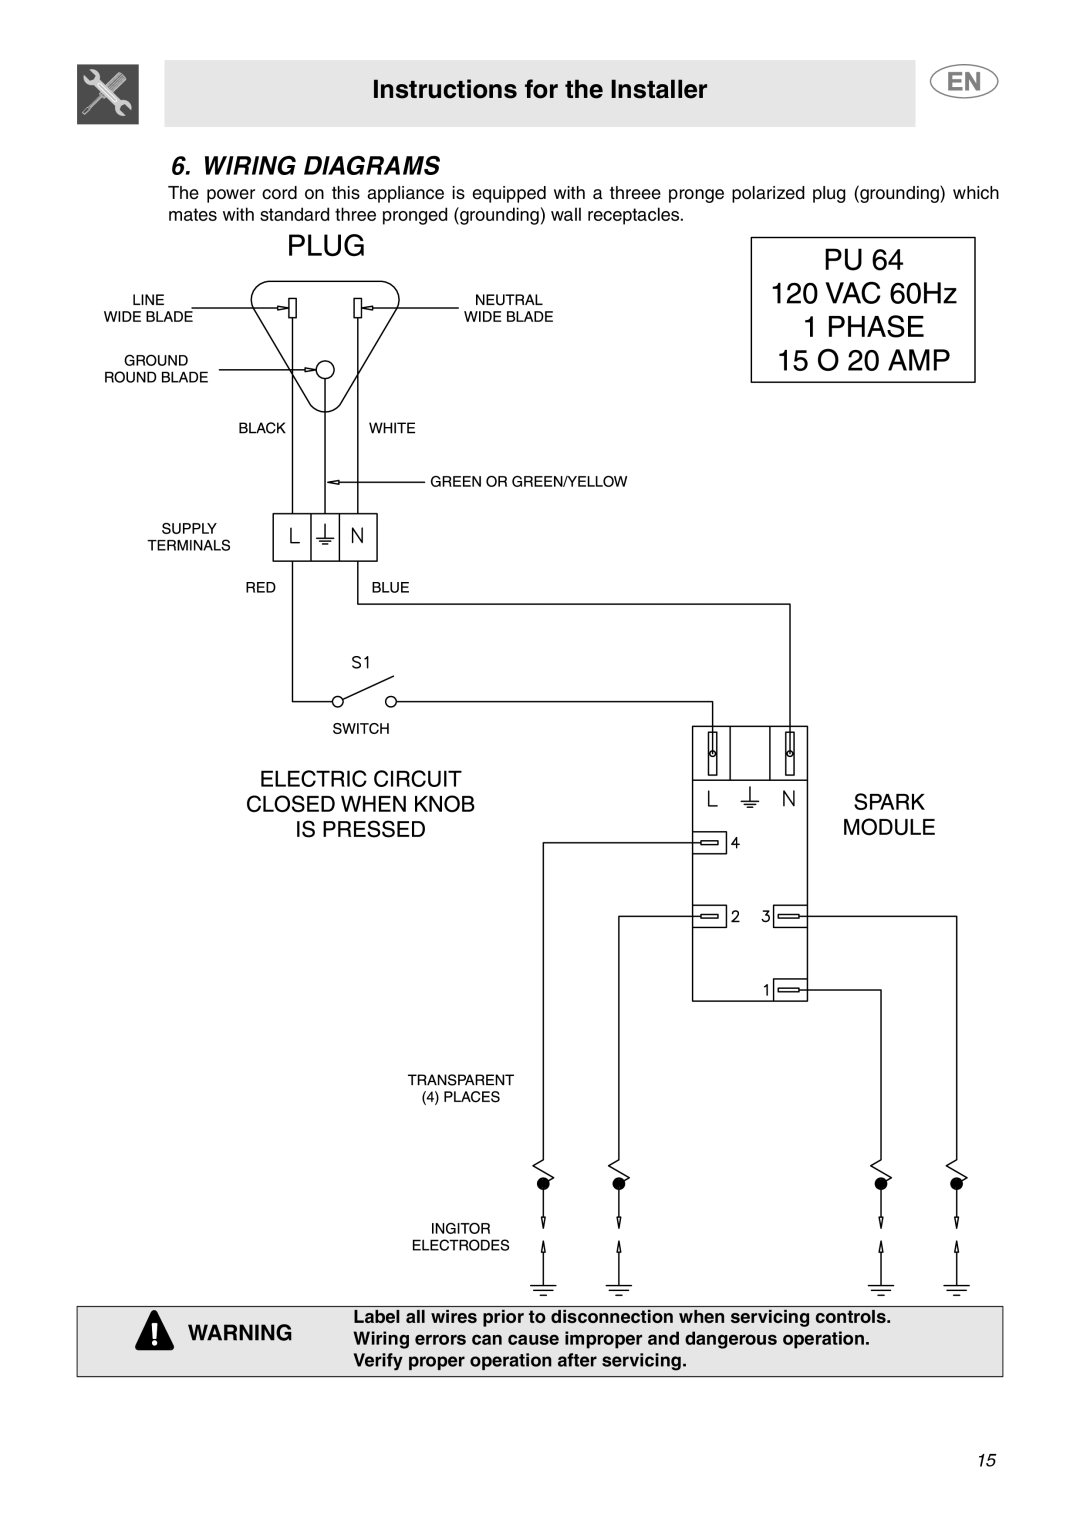 Smeg PU64 Wiring Diagrams, Label all wires prior to disconnection when servicing controls, Instructions for the Installer 